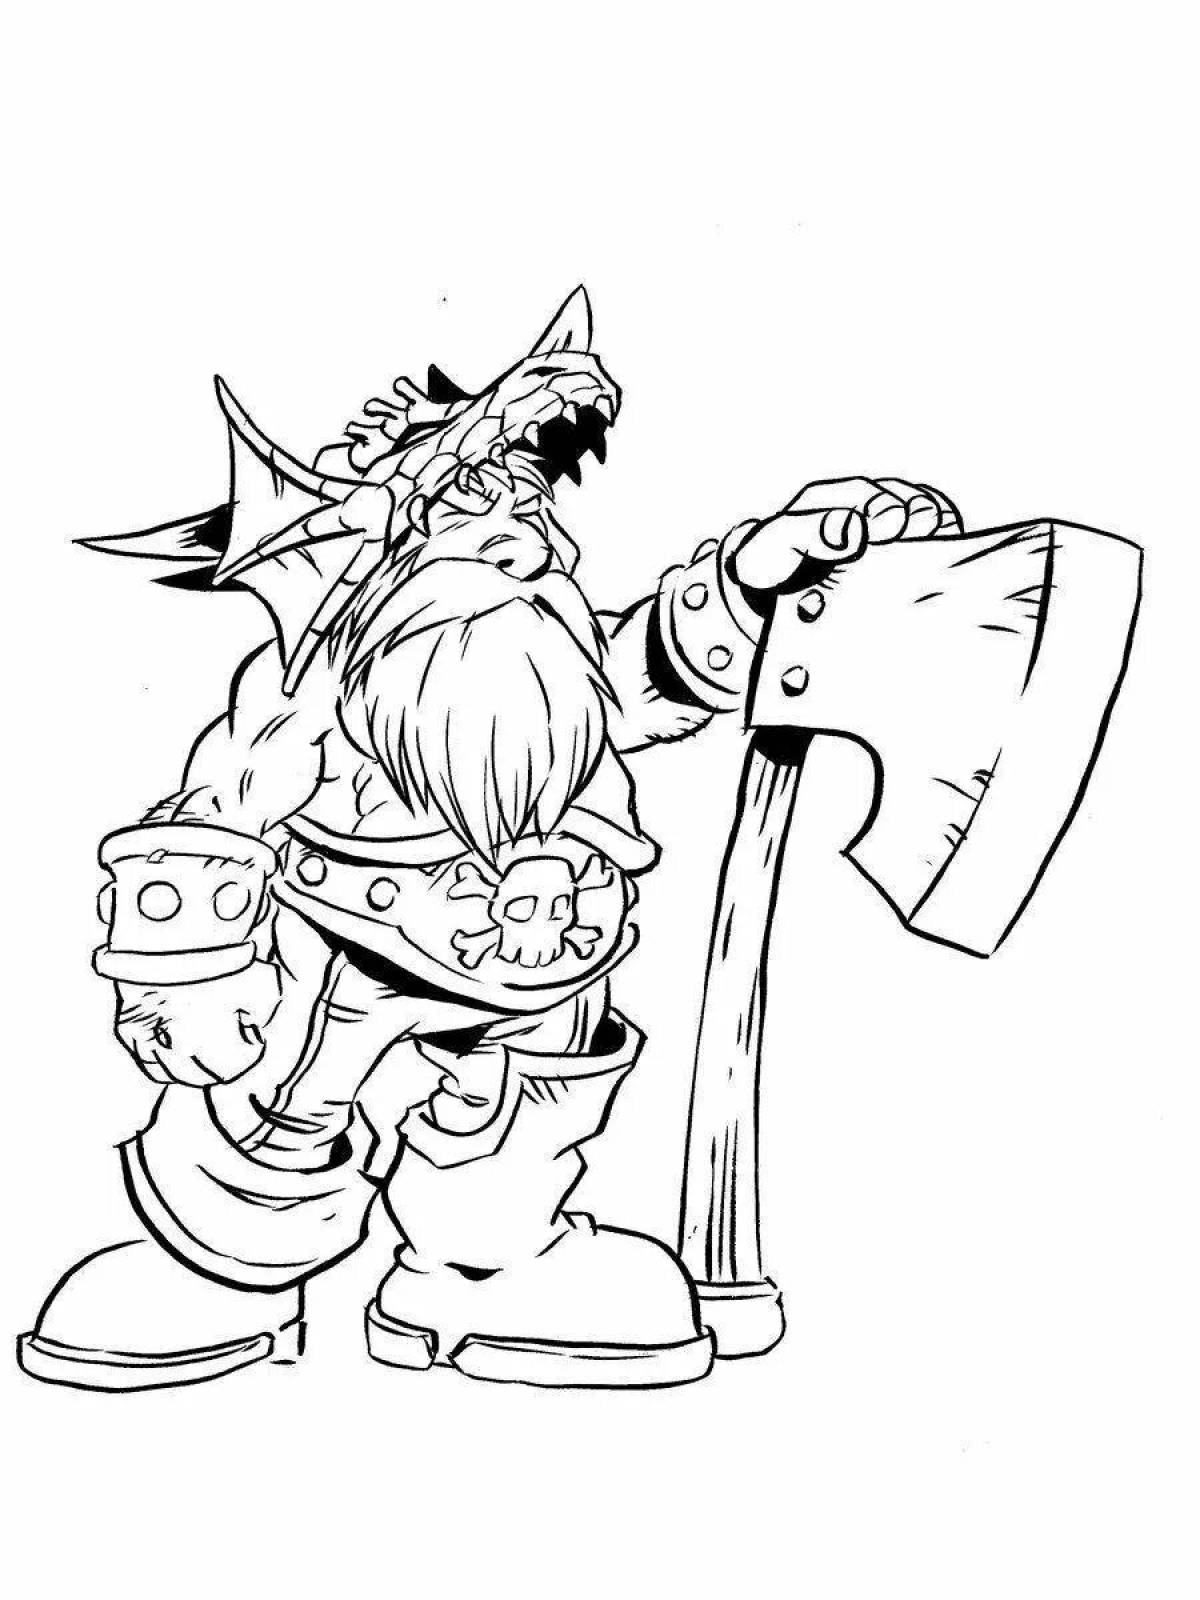 Playful warcraft coloring page